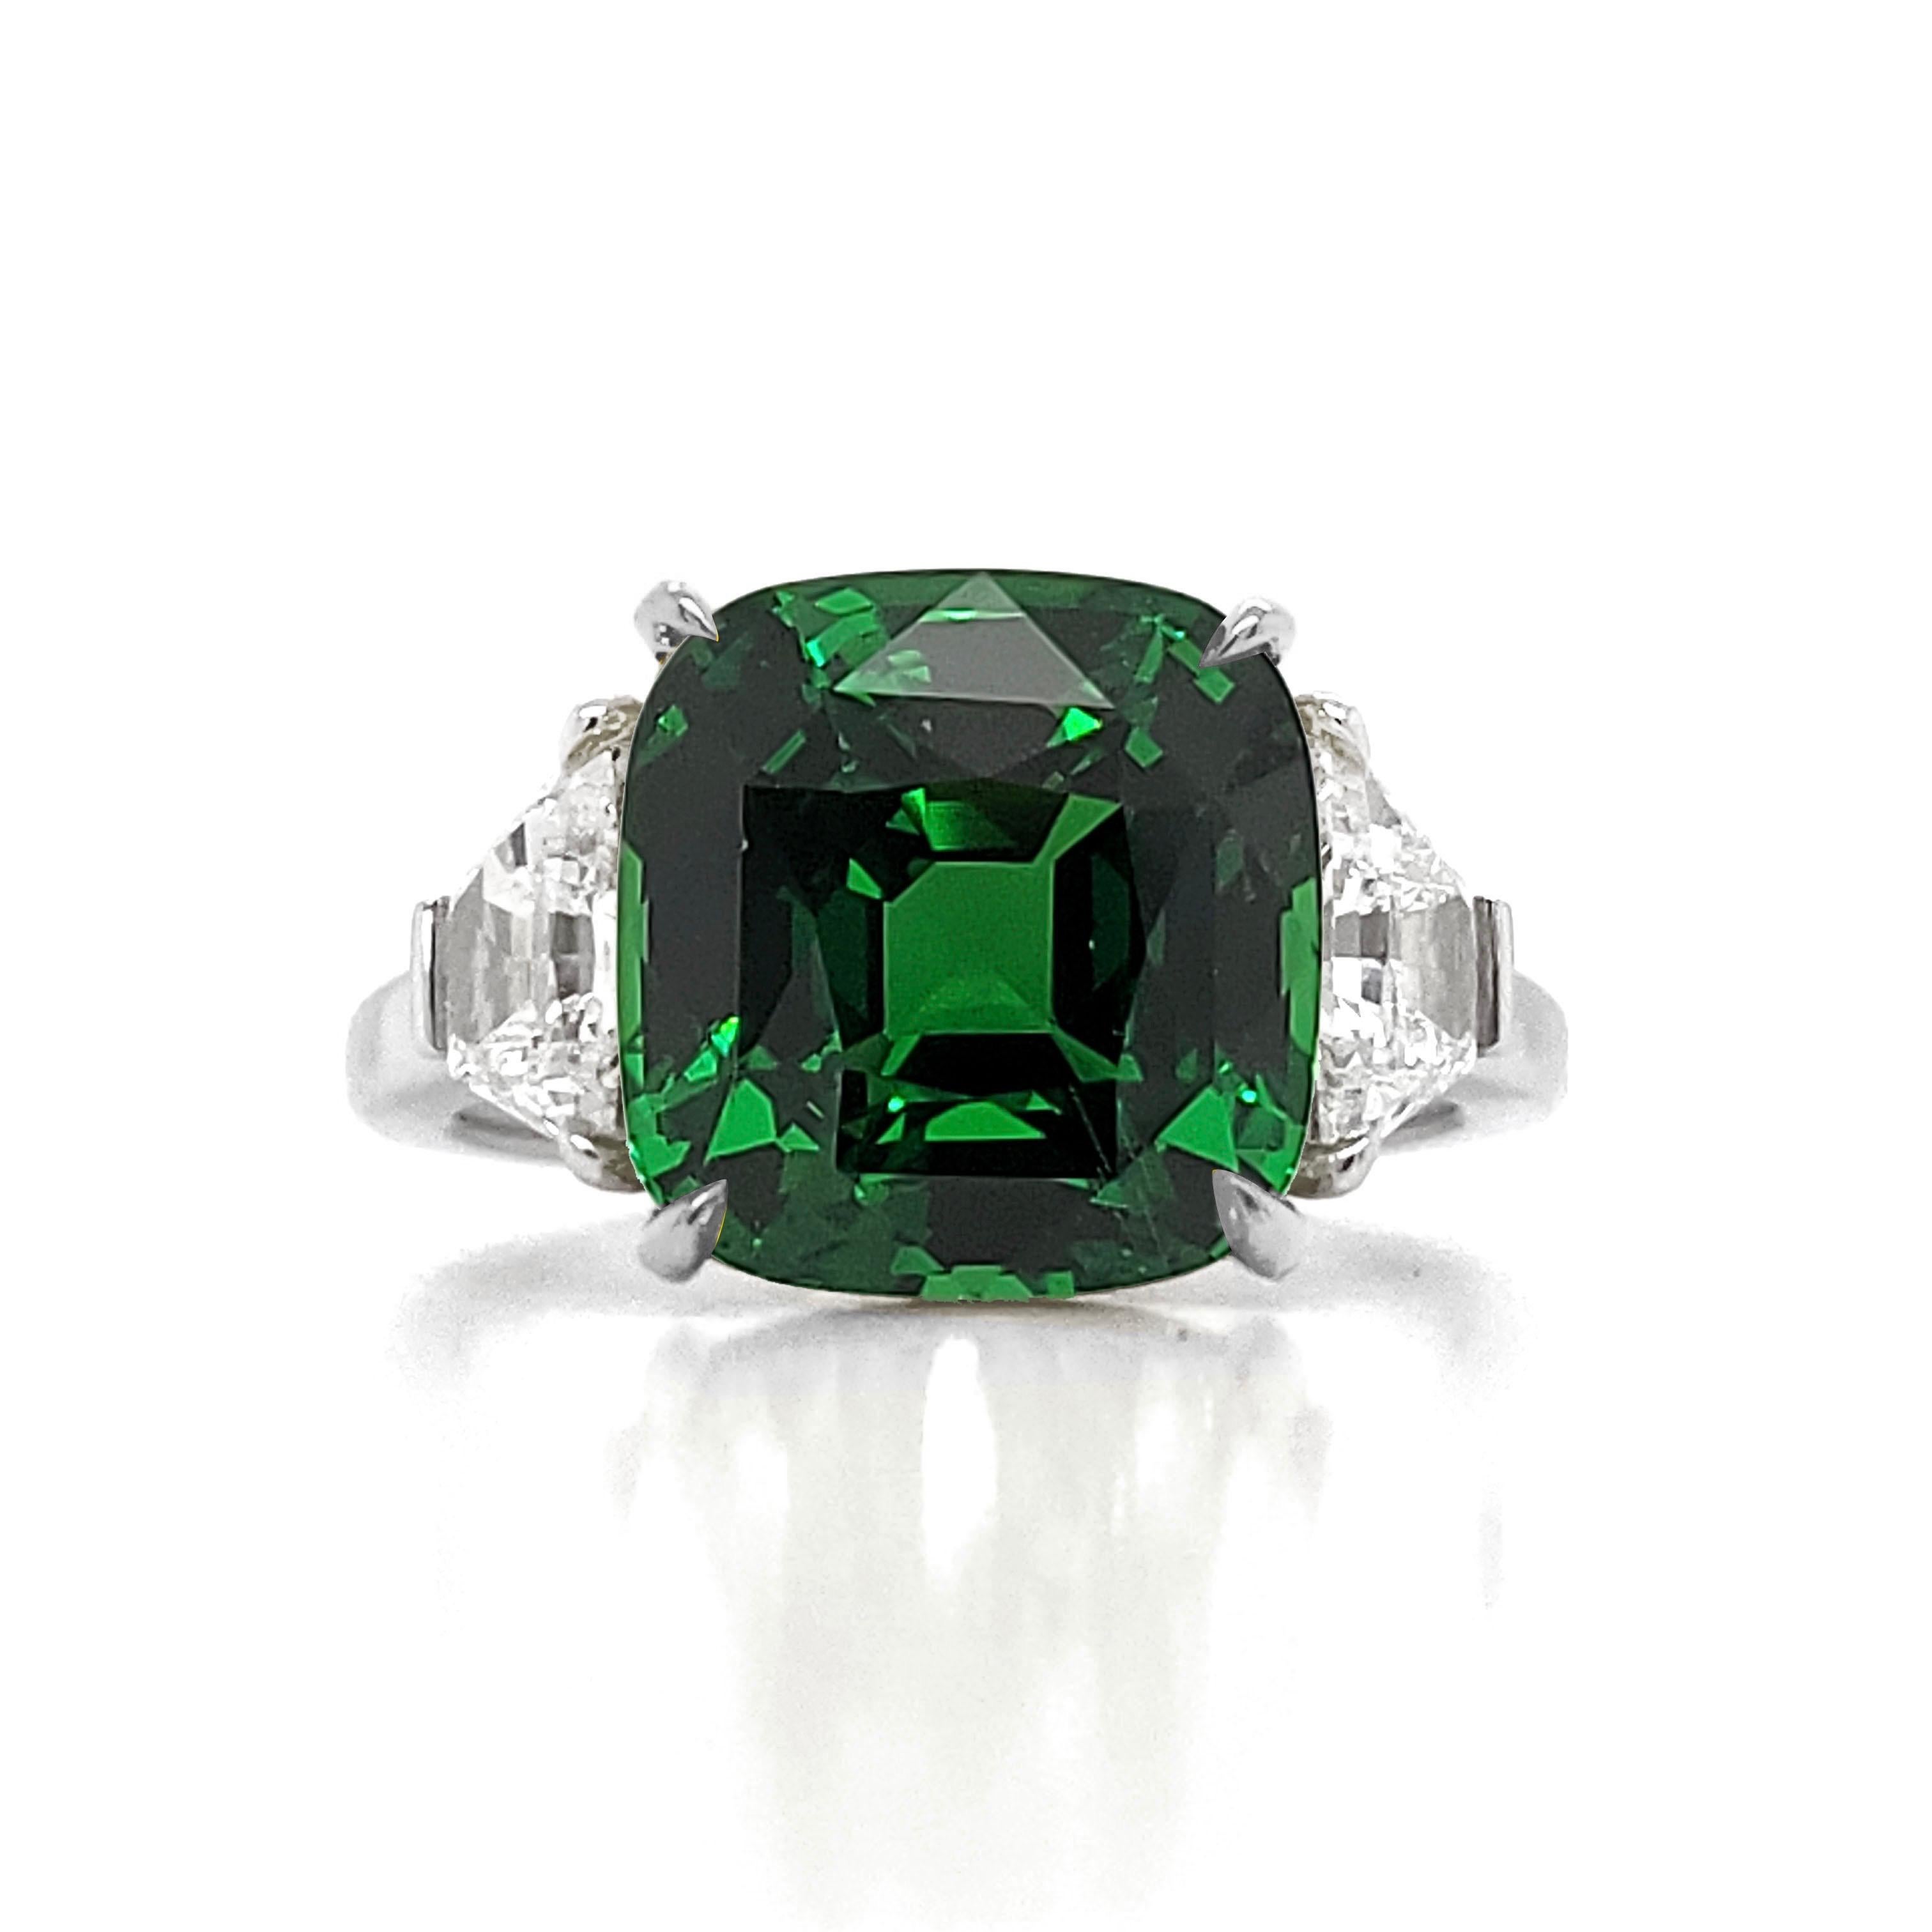 From the vault at Emilio Jewelry, Located On New York’s Iconic Fifth Avenue:
Showcasing a magnificent natural vivid green Tsavorite with no heat treatment and completely natural in the center. It has excellent transparency and very clean. Set in